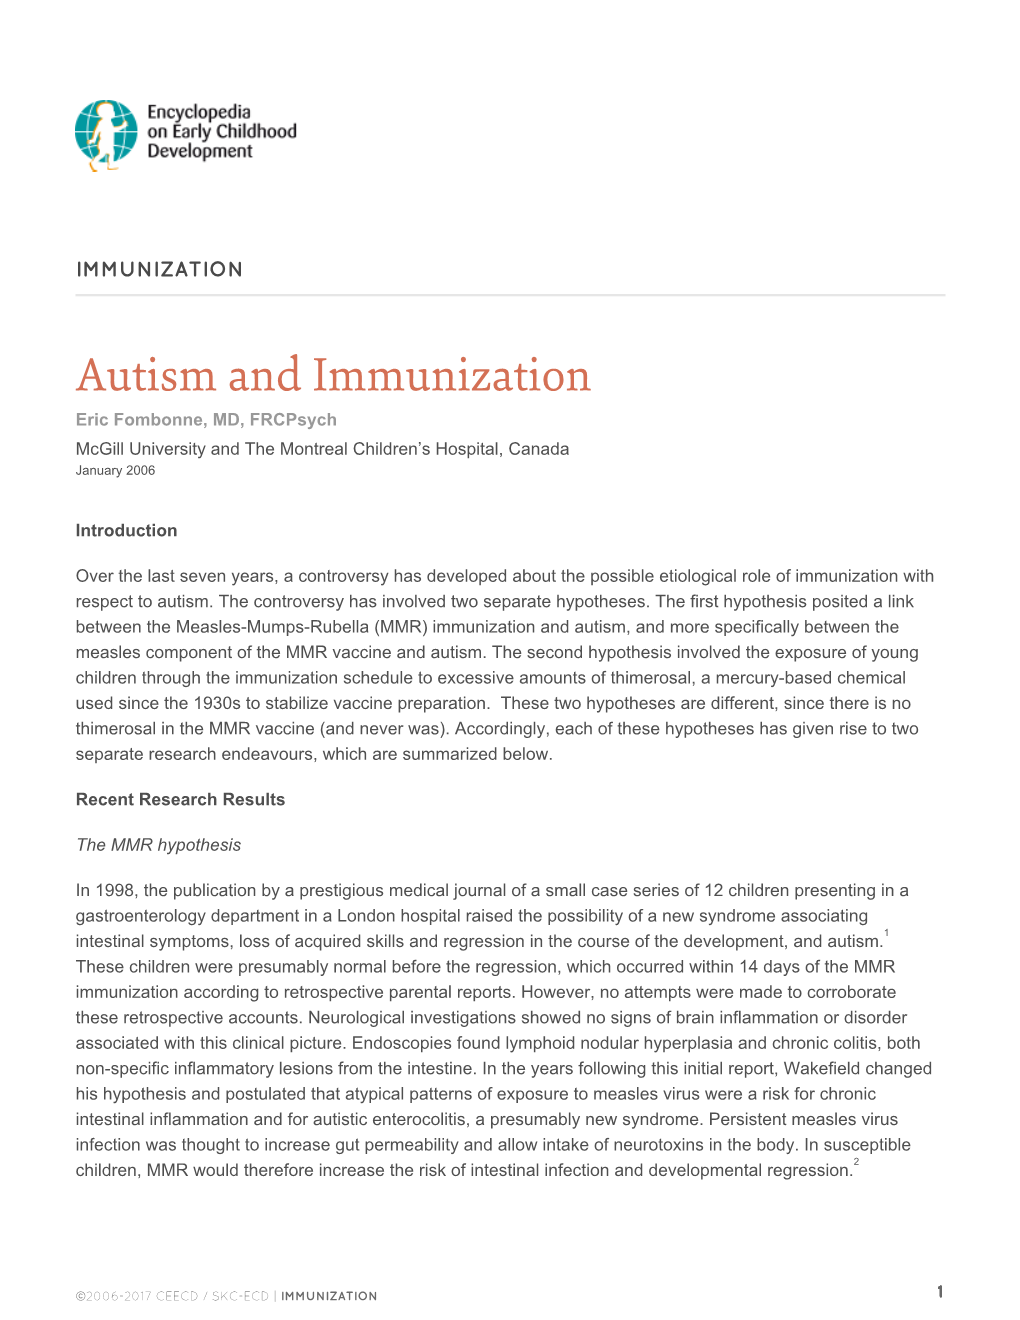 Autism and Immunization Eric Fombonne, MD, Frcpsych Mcgill University and the Montreal Children’S Hospital, Canada January 2006